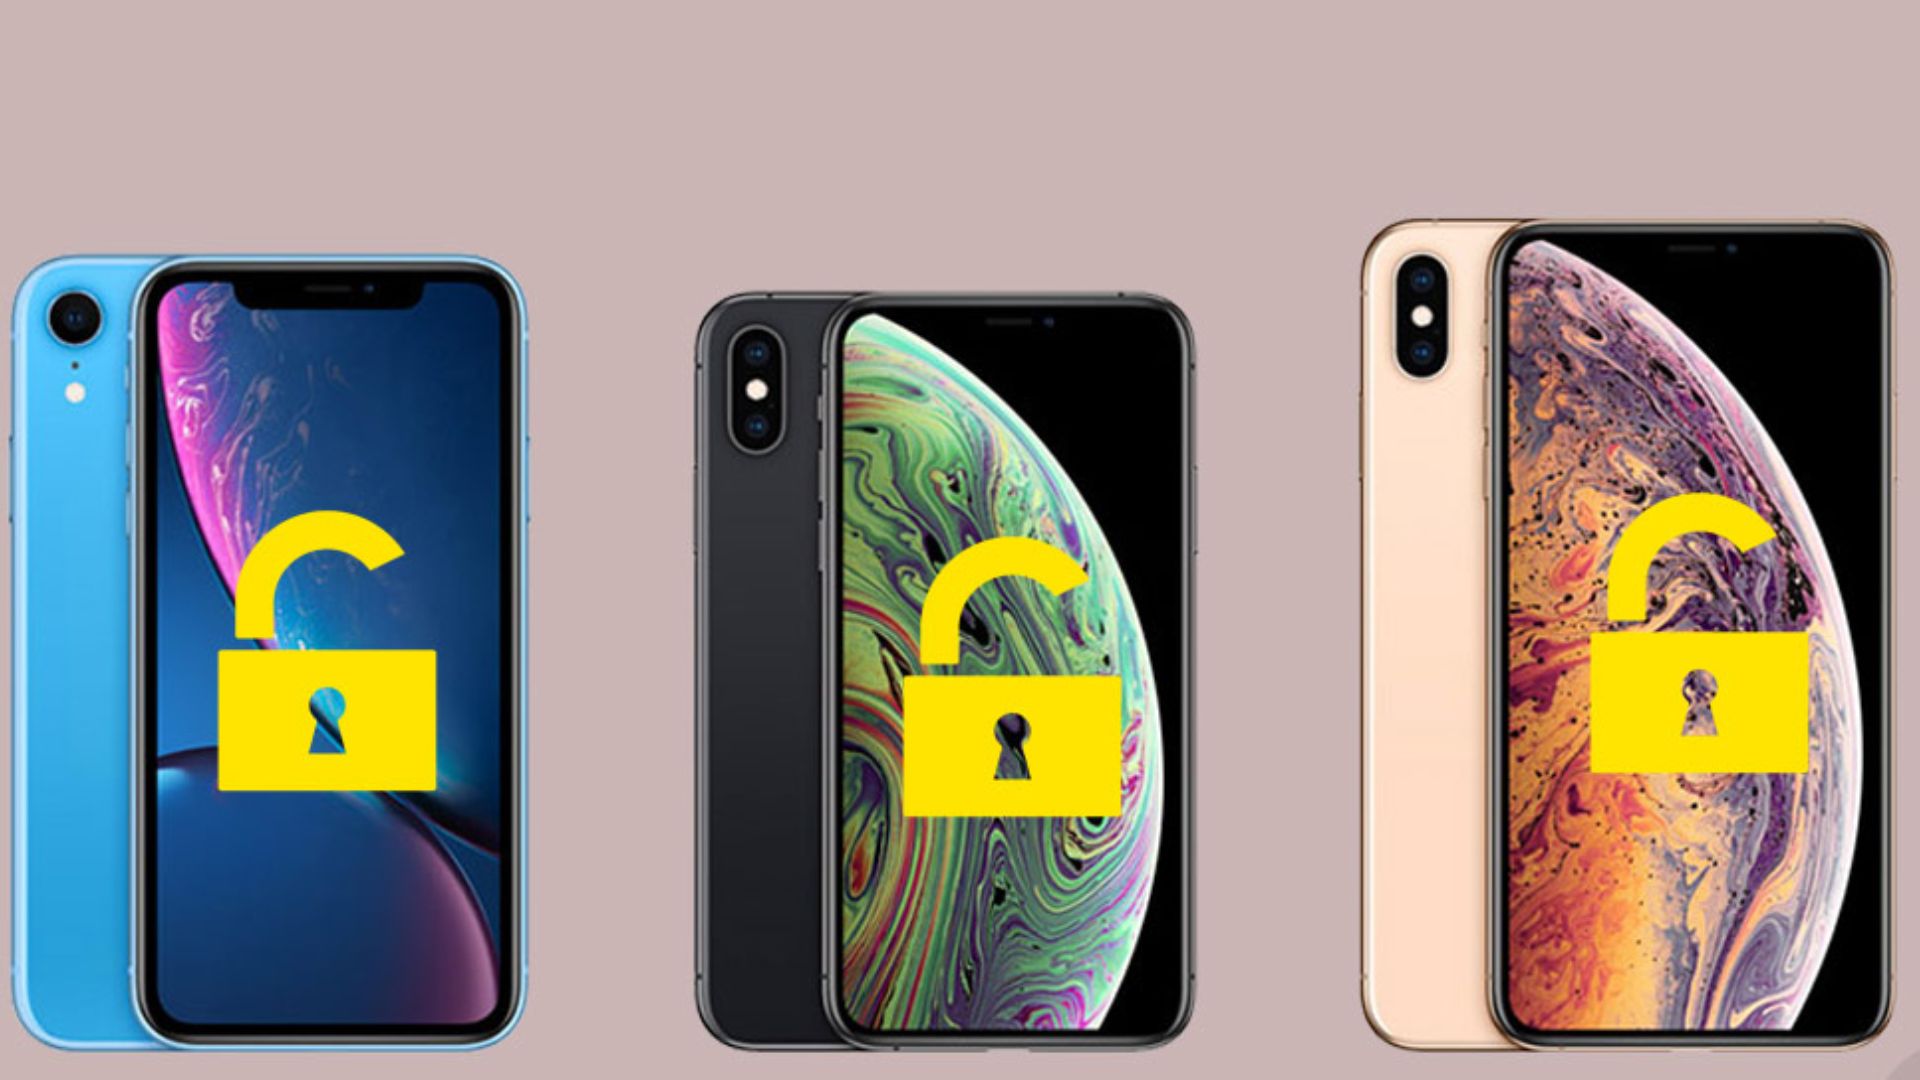 How To SIM Unlock IPhone XR To Switch Networks?